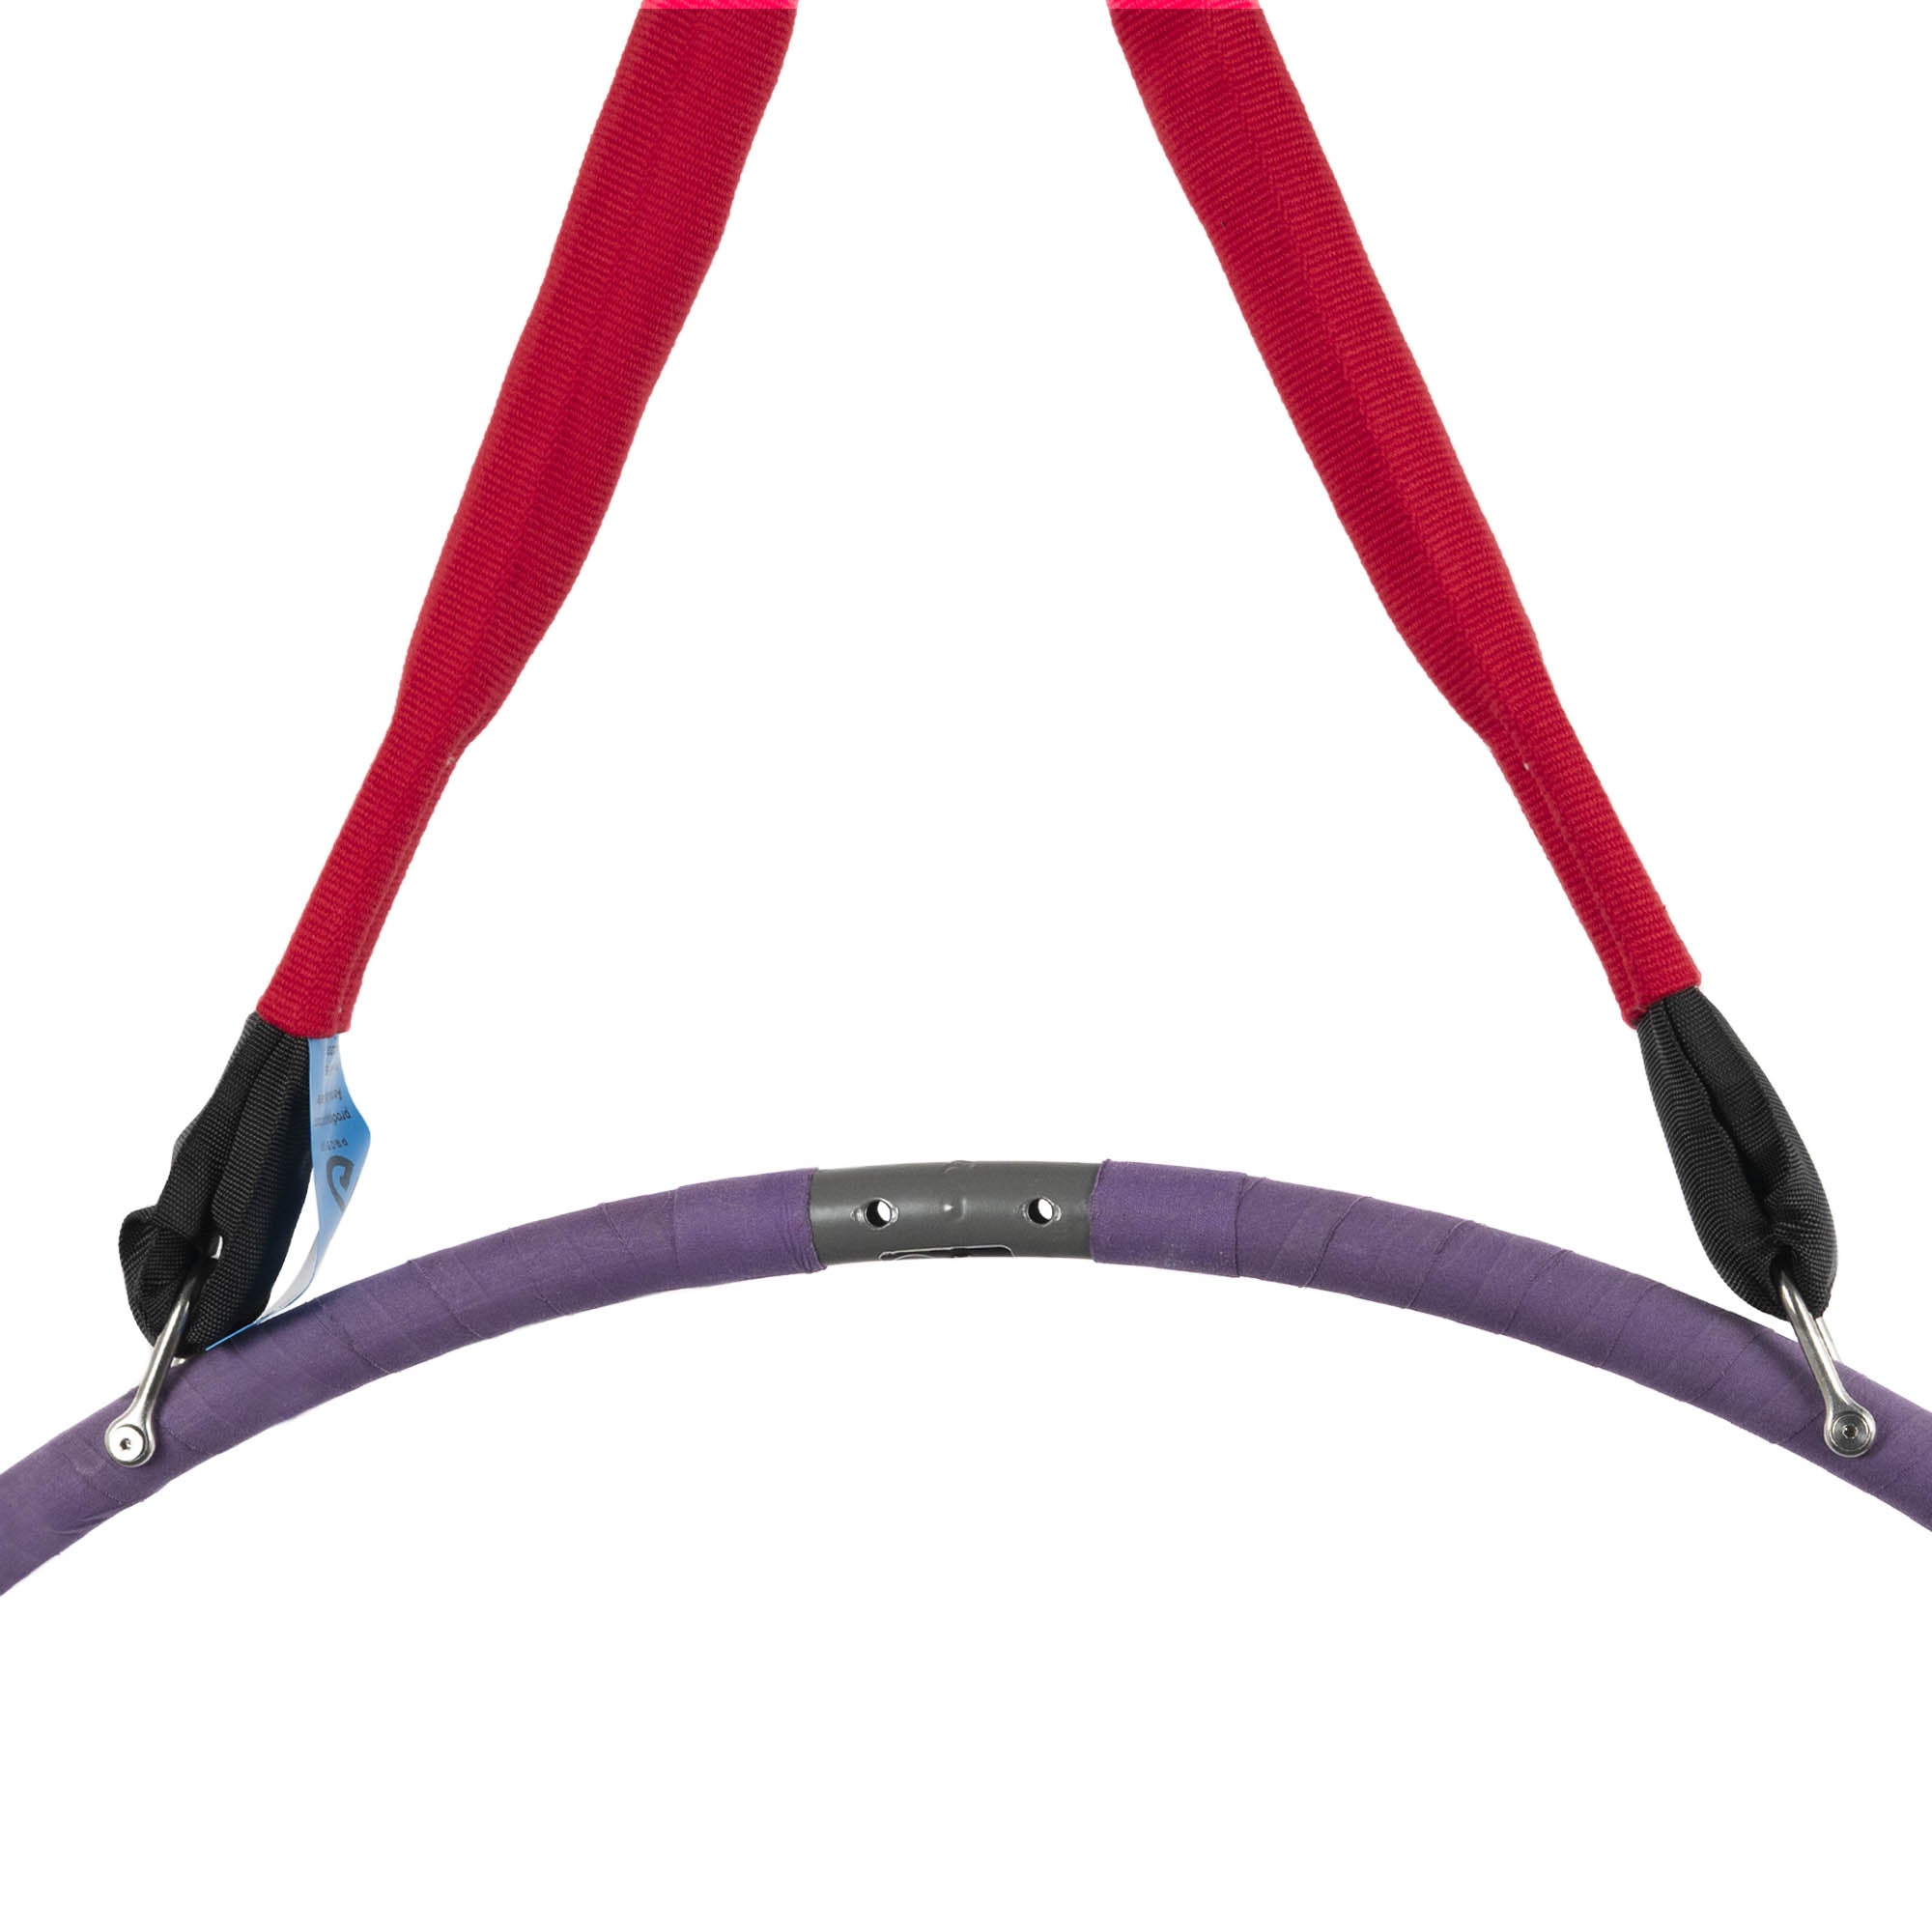 Red Prodigy CottonSafe Rope rigged to hoop